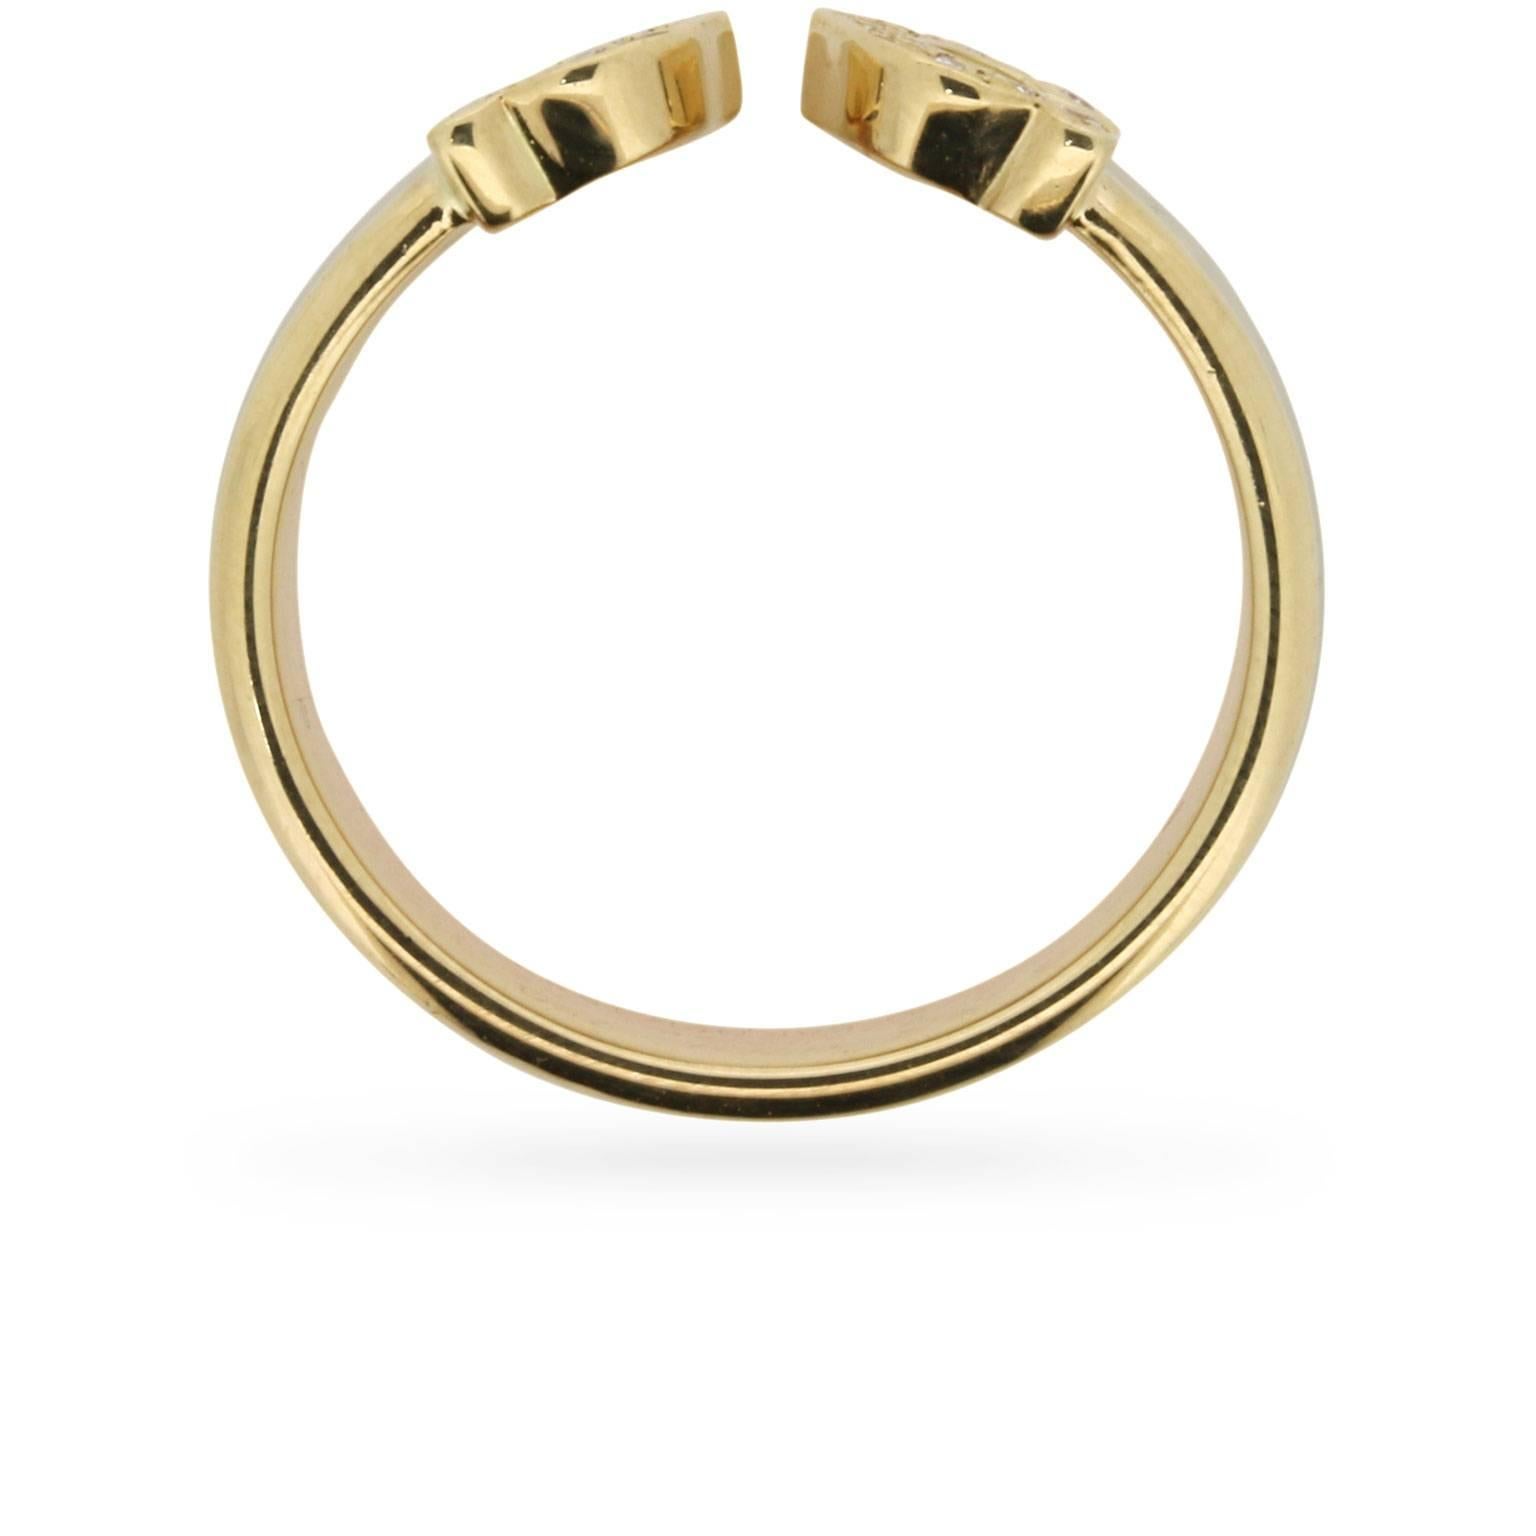 A classic Cartier piece, with the three different colours of gold. This lovely ring compromises of three bands, one made of 18 carat yellow gold, another 18 carat white gold and the third 18 carat rose gold.

At either end, there is a handcrafted